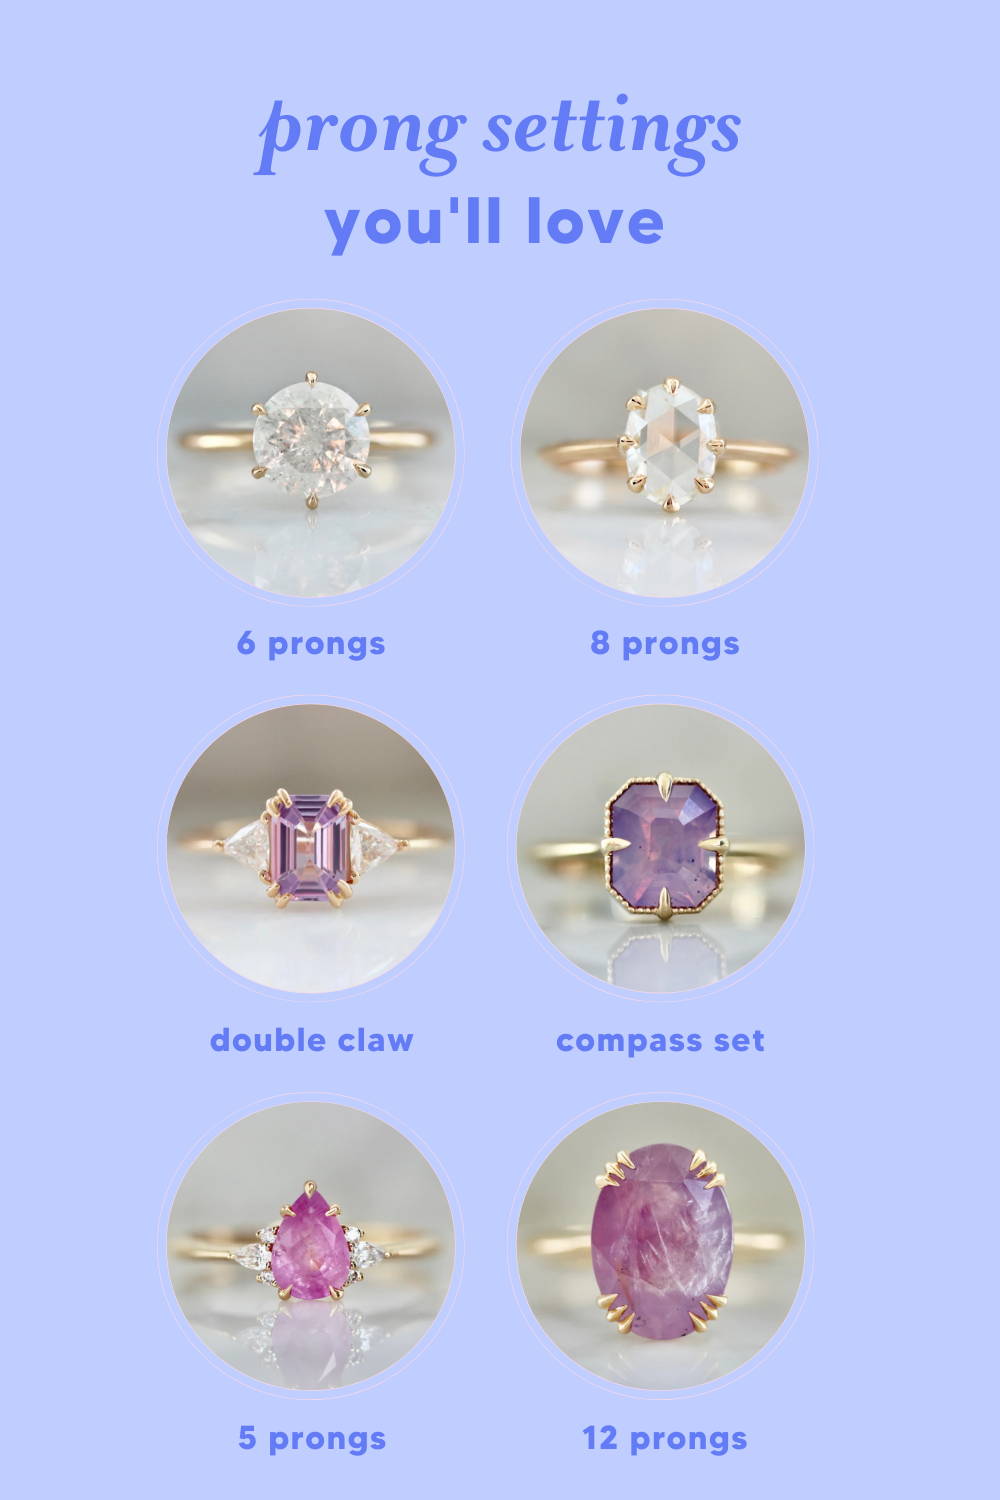 ring prong setting types